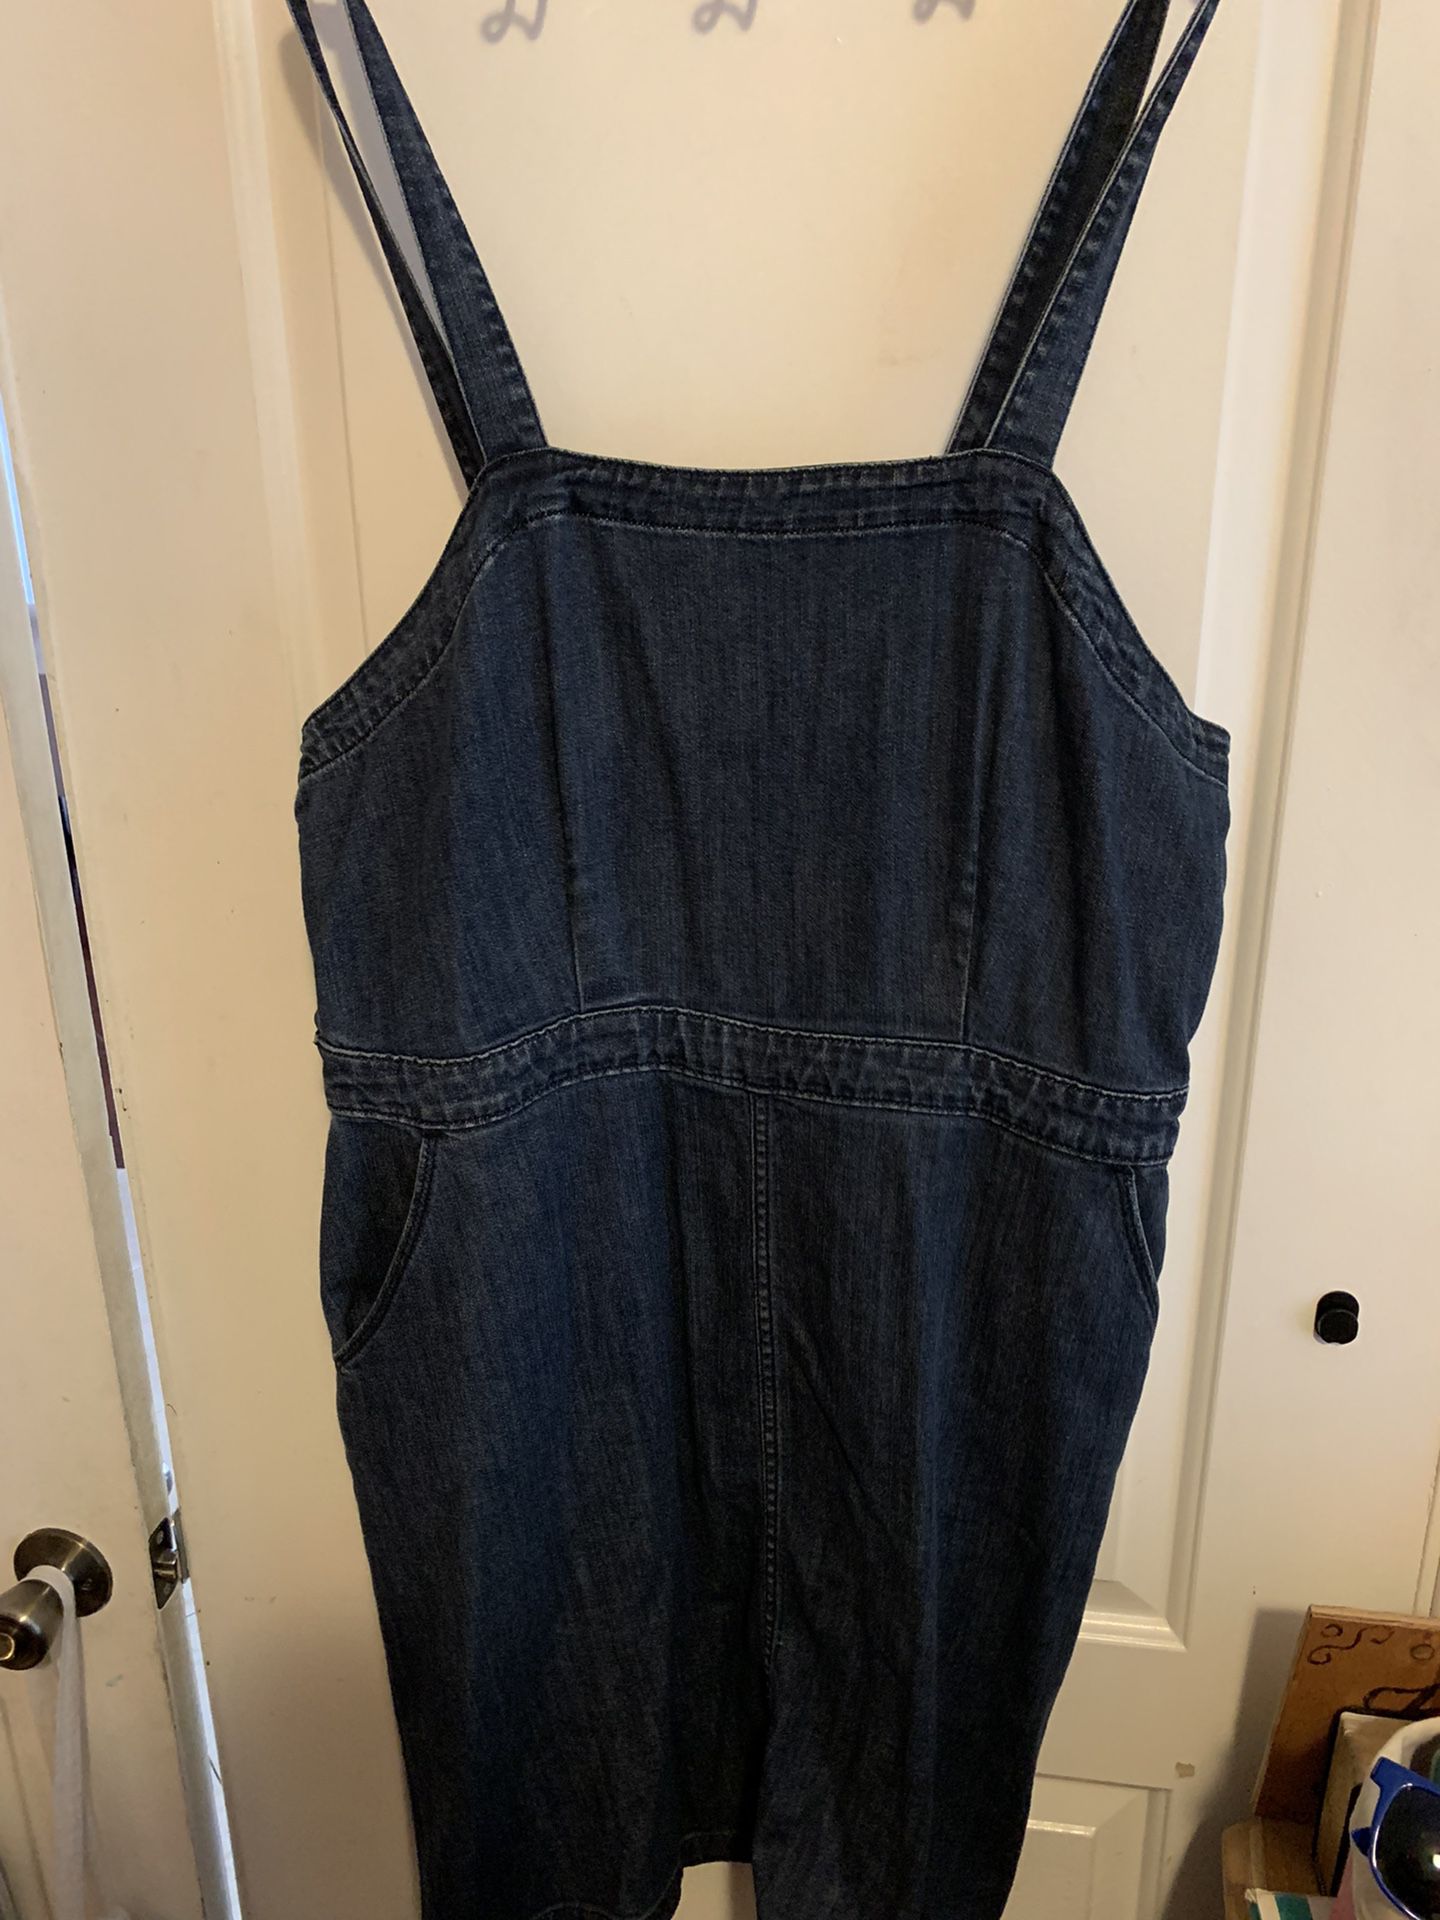 Overall Dress With Pockets And Adjustable Straps 